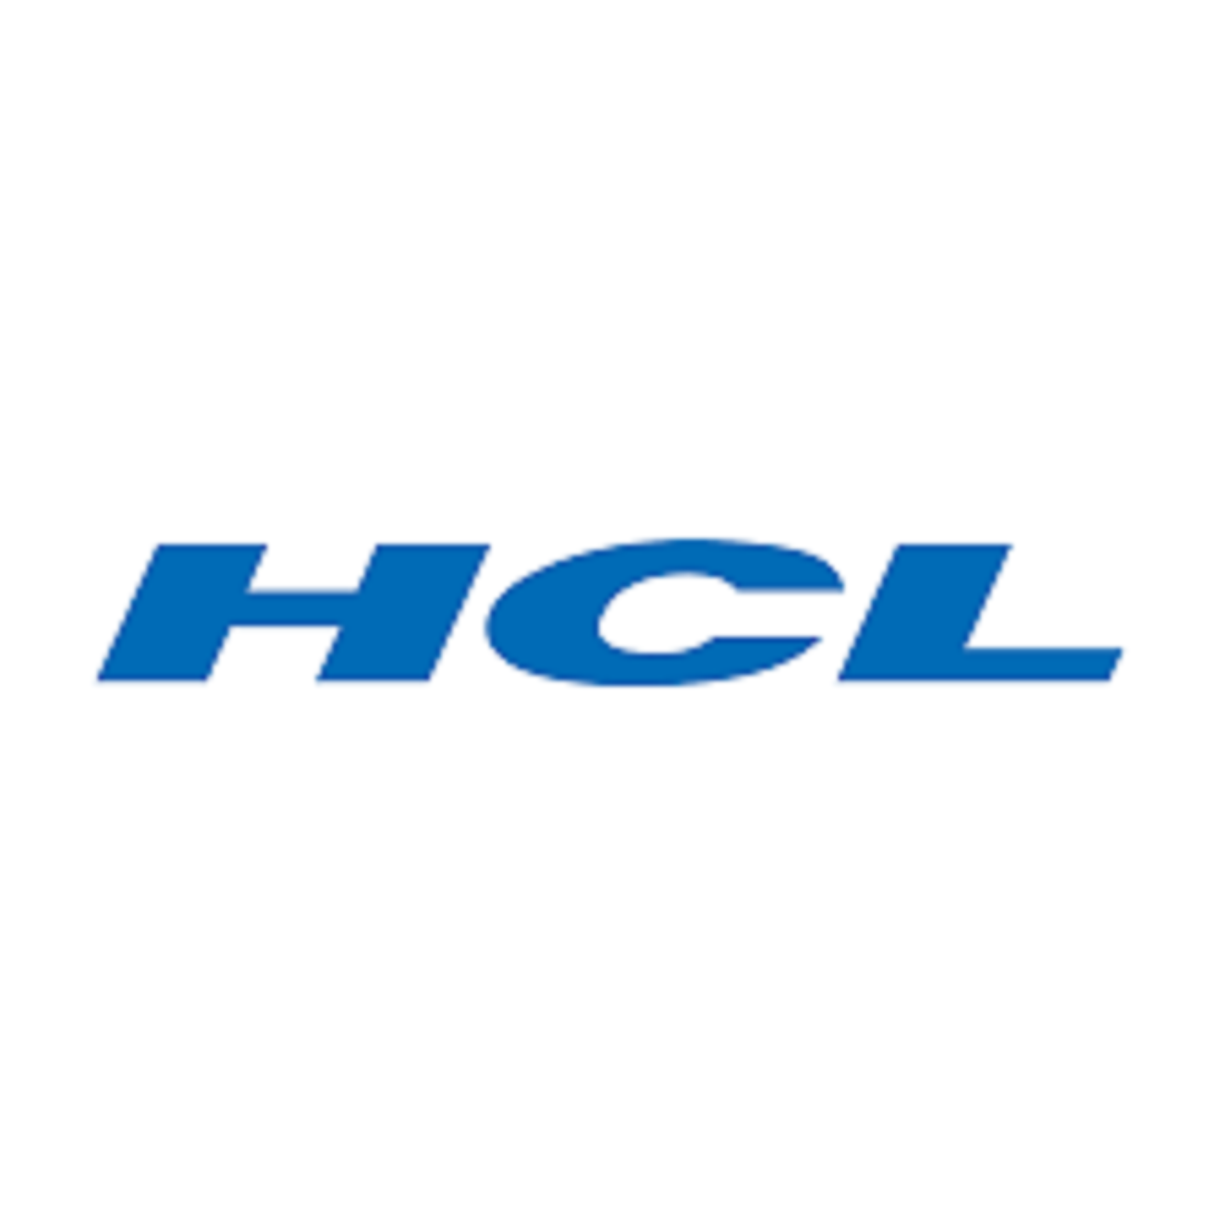 HCL Off Campus Drive